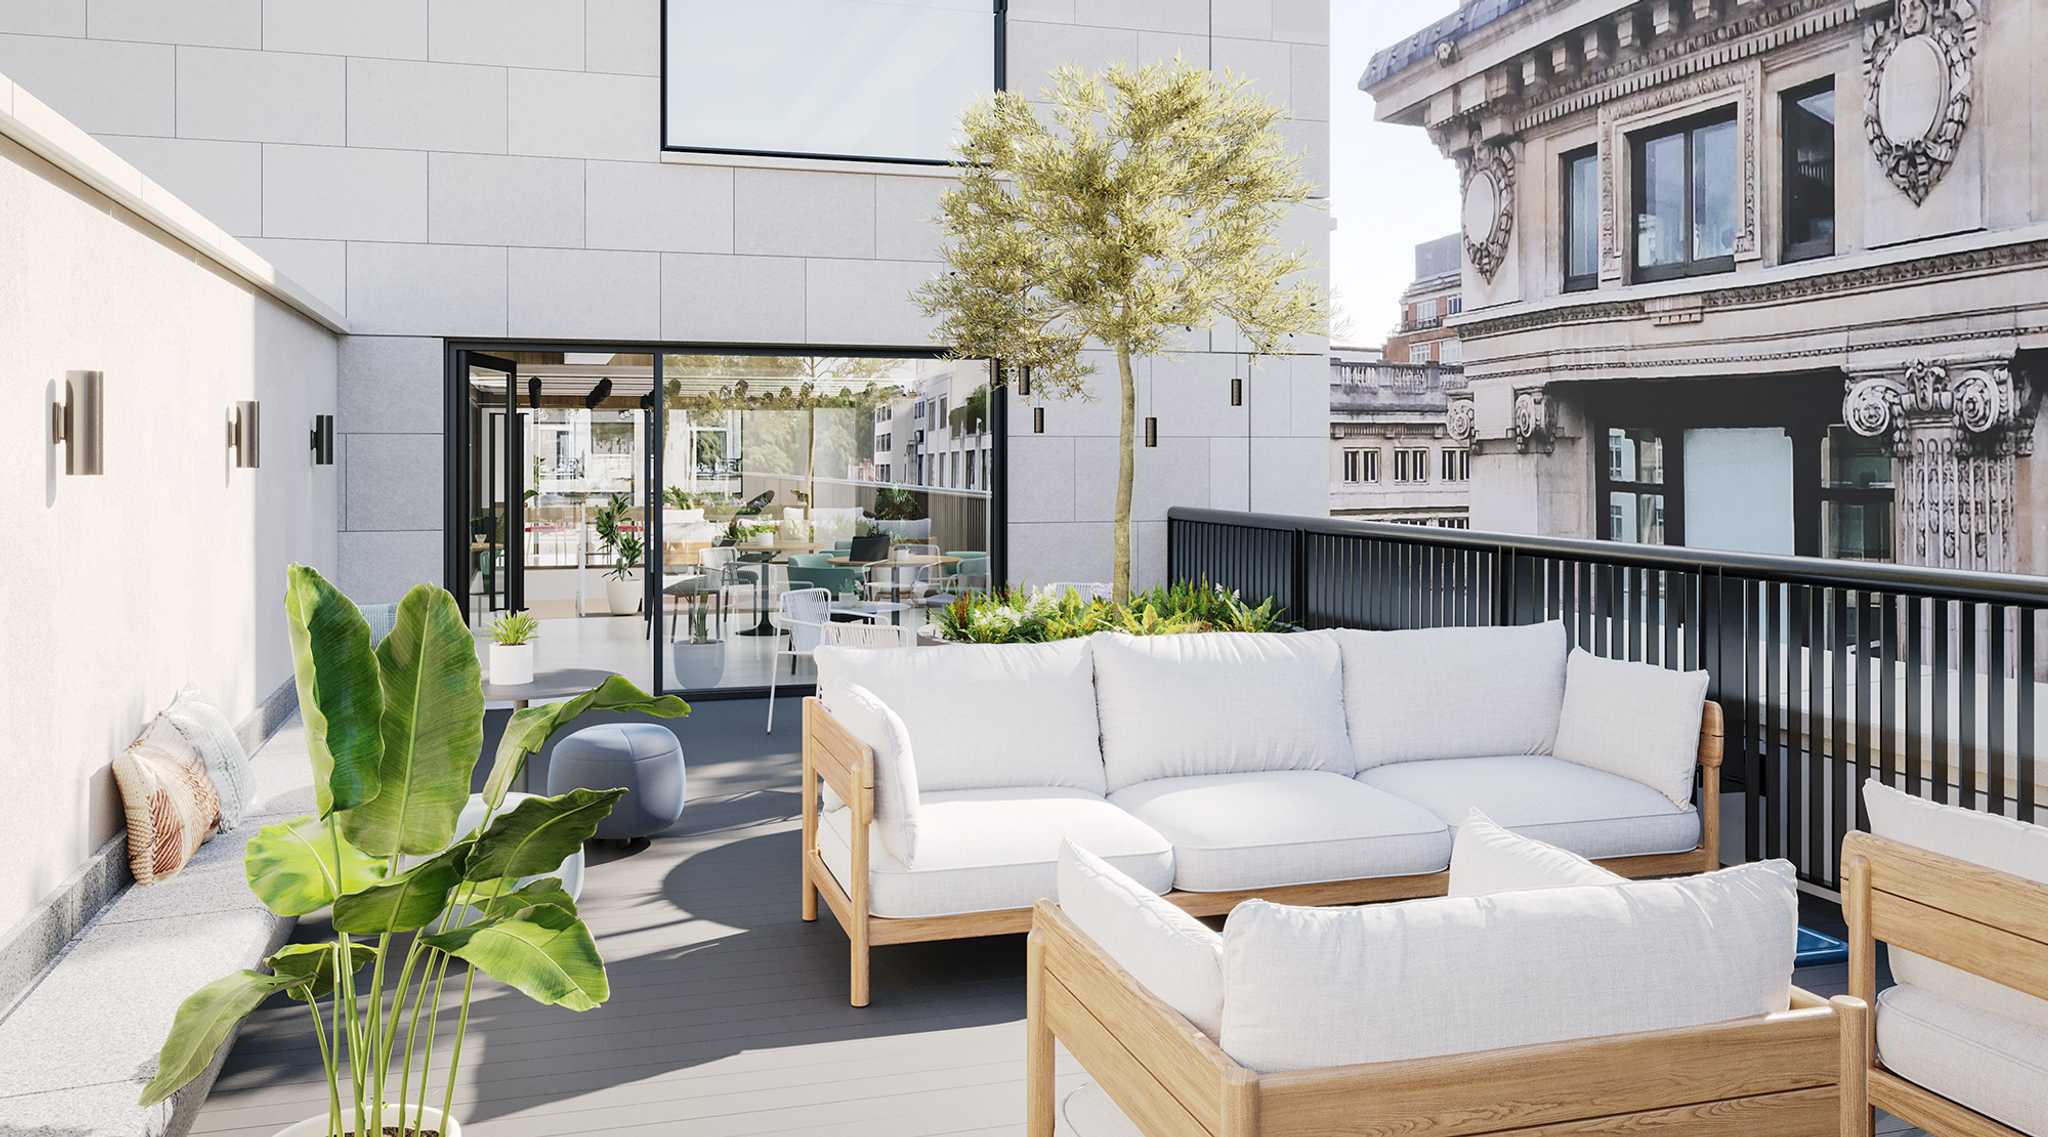 Outdoor office space at Fora’s Parcel’s Building on Oxford Street.